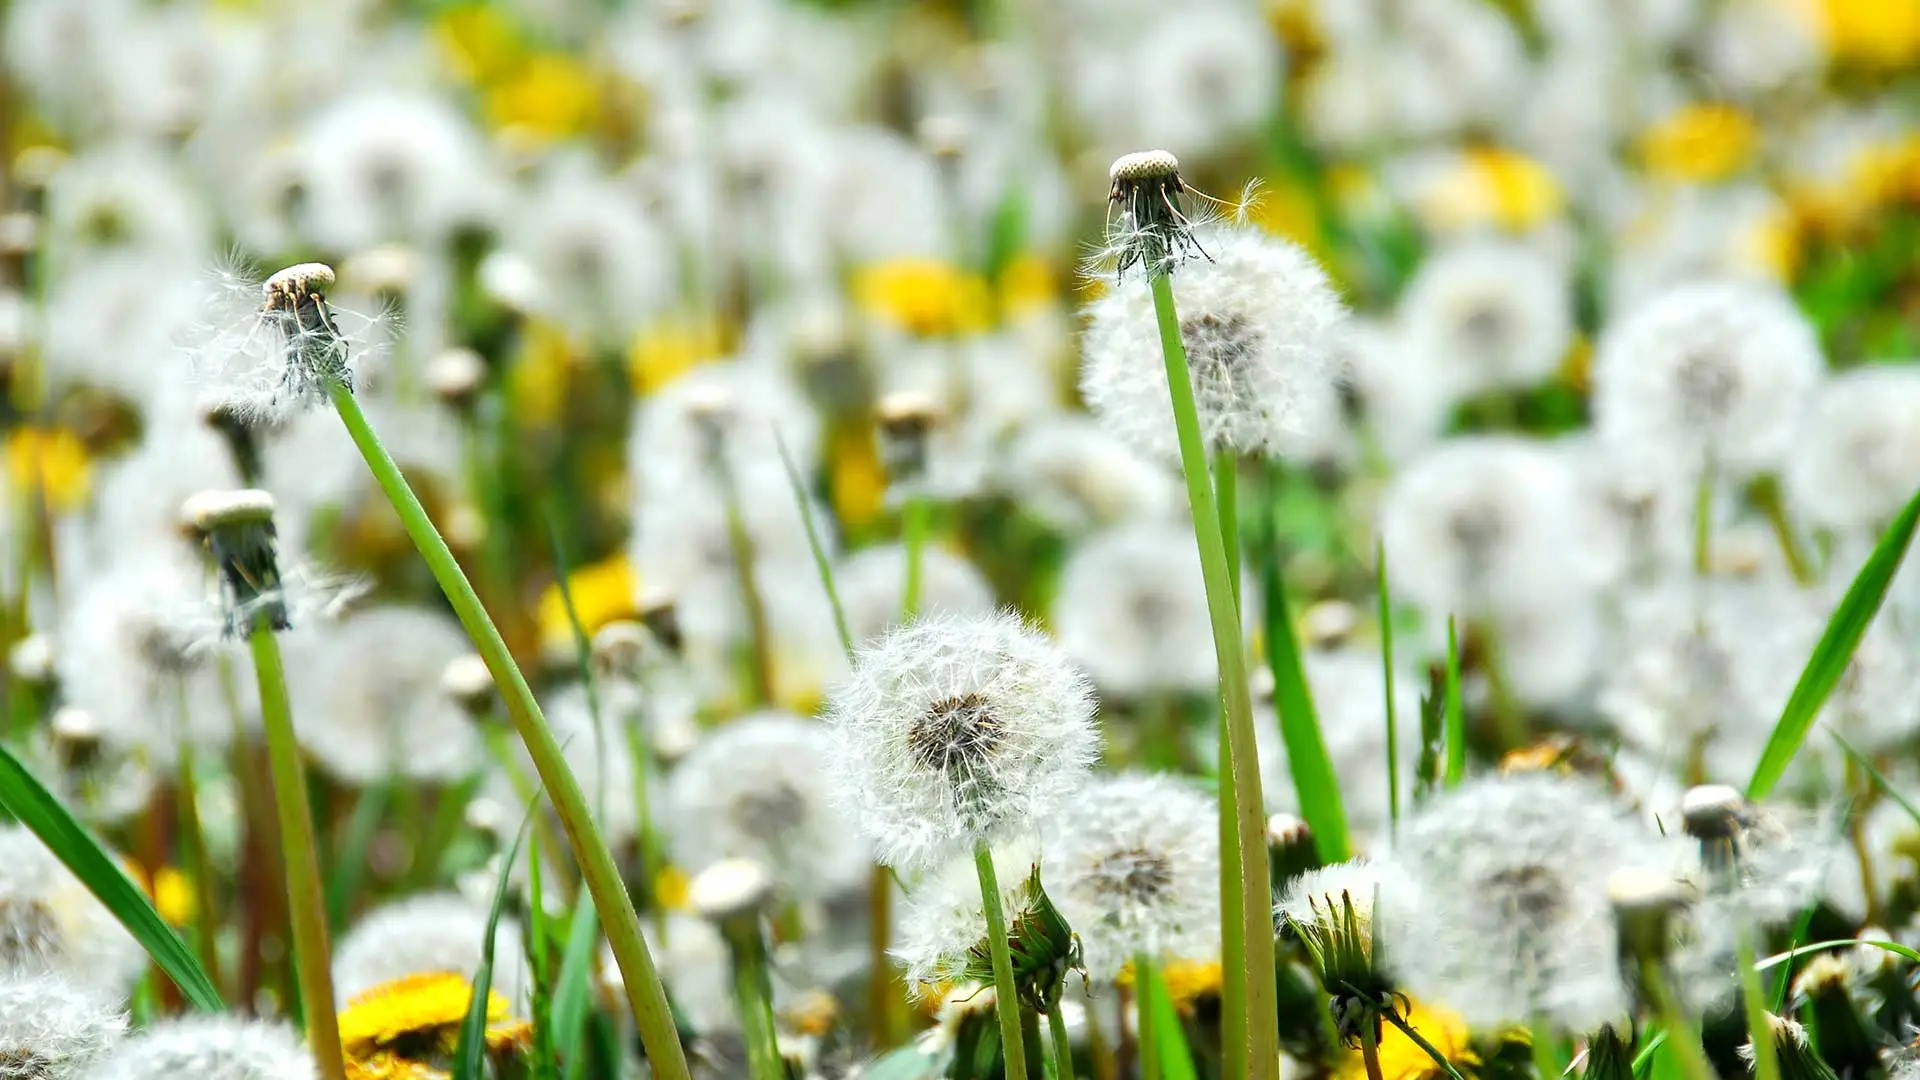 Close up photo of dandelions growing on a Macomb, MI property.